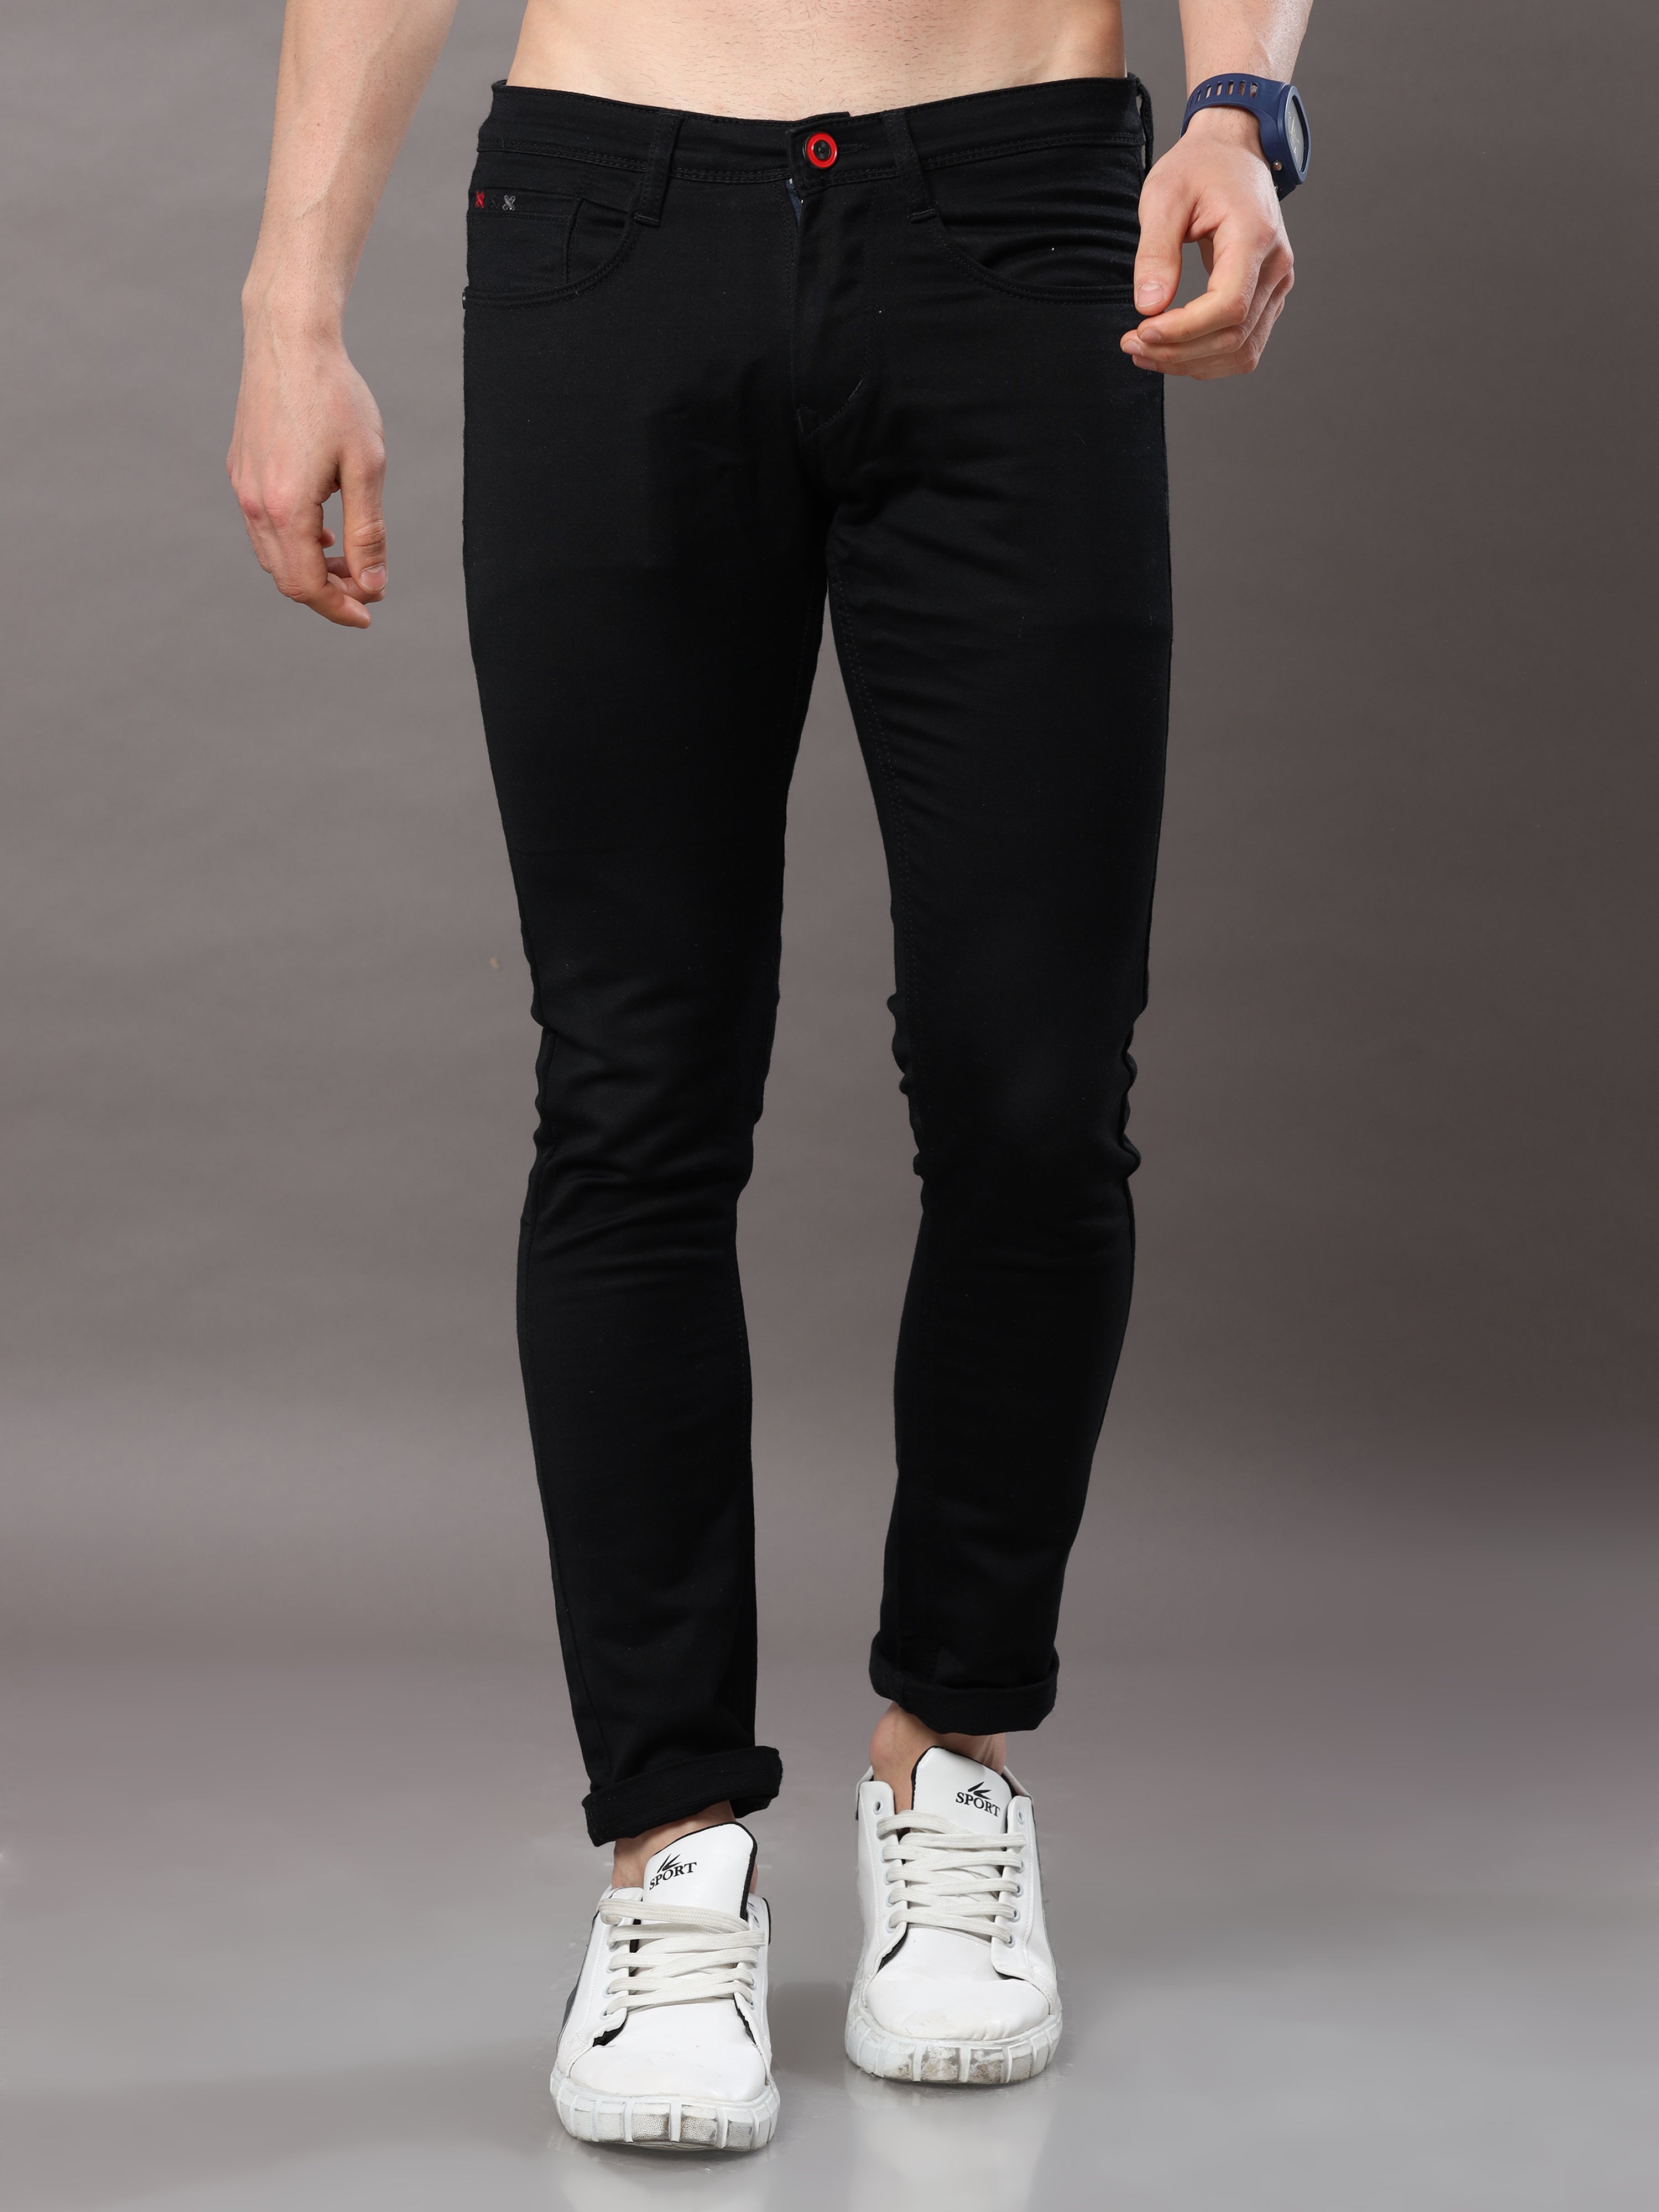 Louis Philippe Jeans Solid Men Grey Track Pants - Buy Louis Philippe Jeans  Solid Men Grey Track Pants Online at Best Prices in India | Flipkart.com